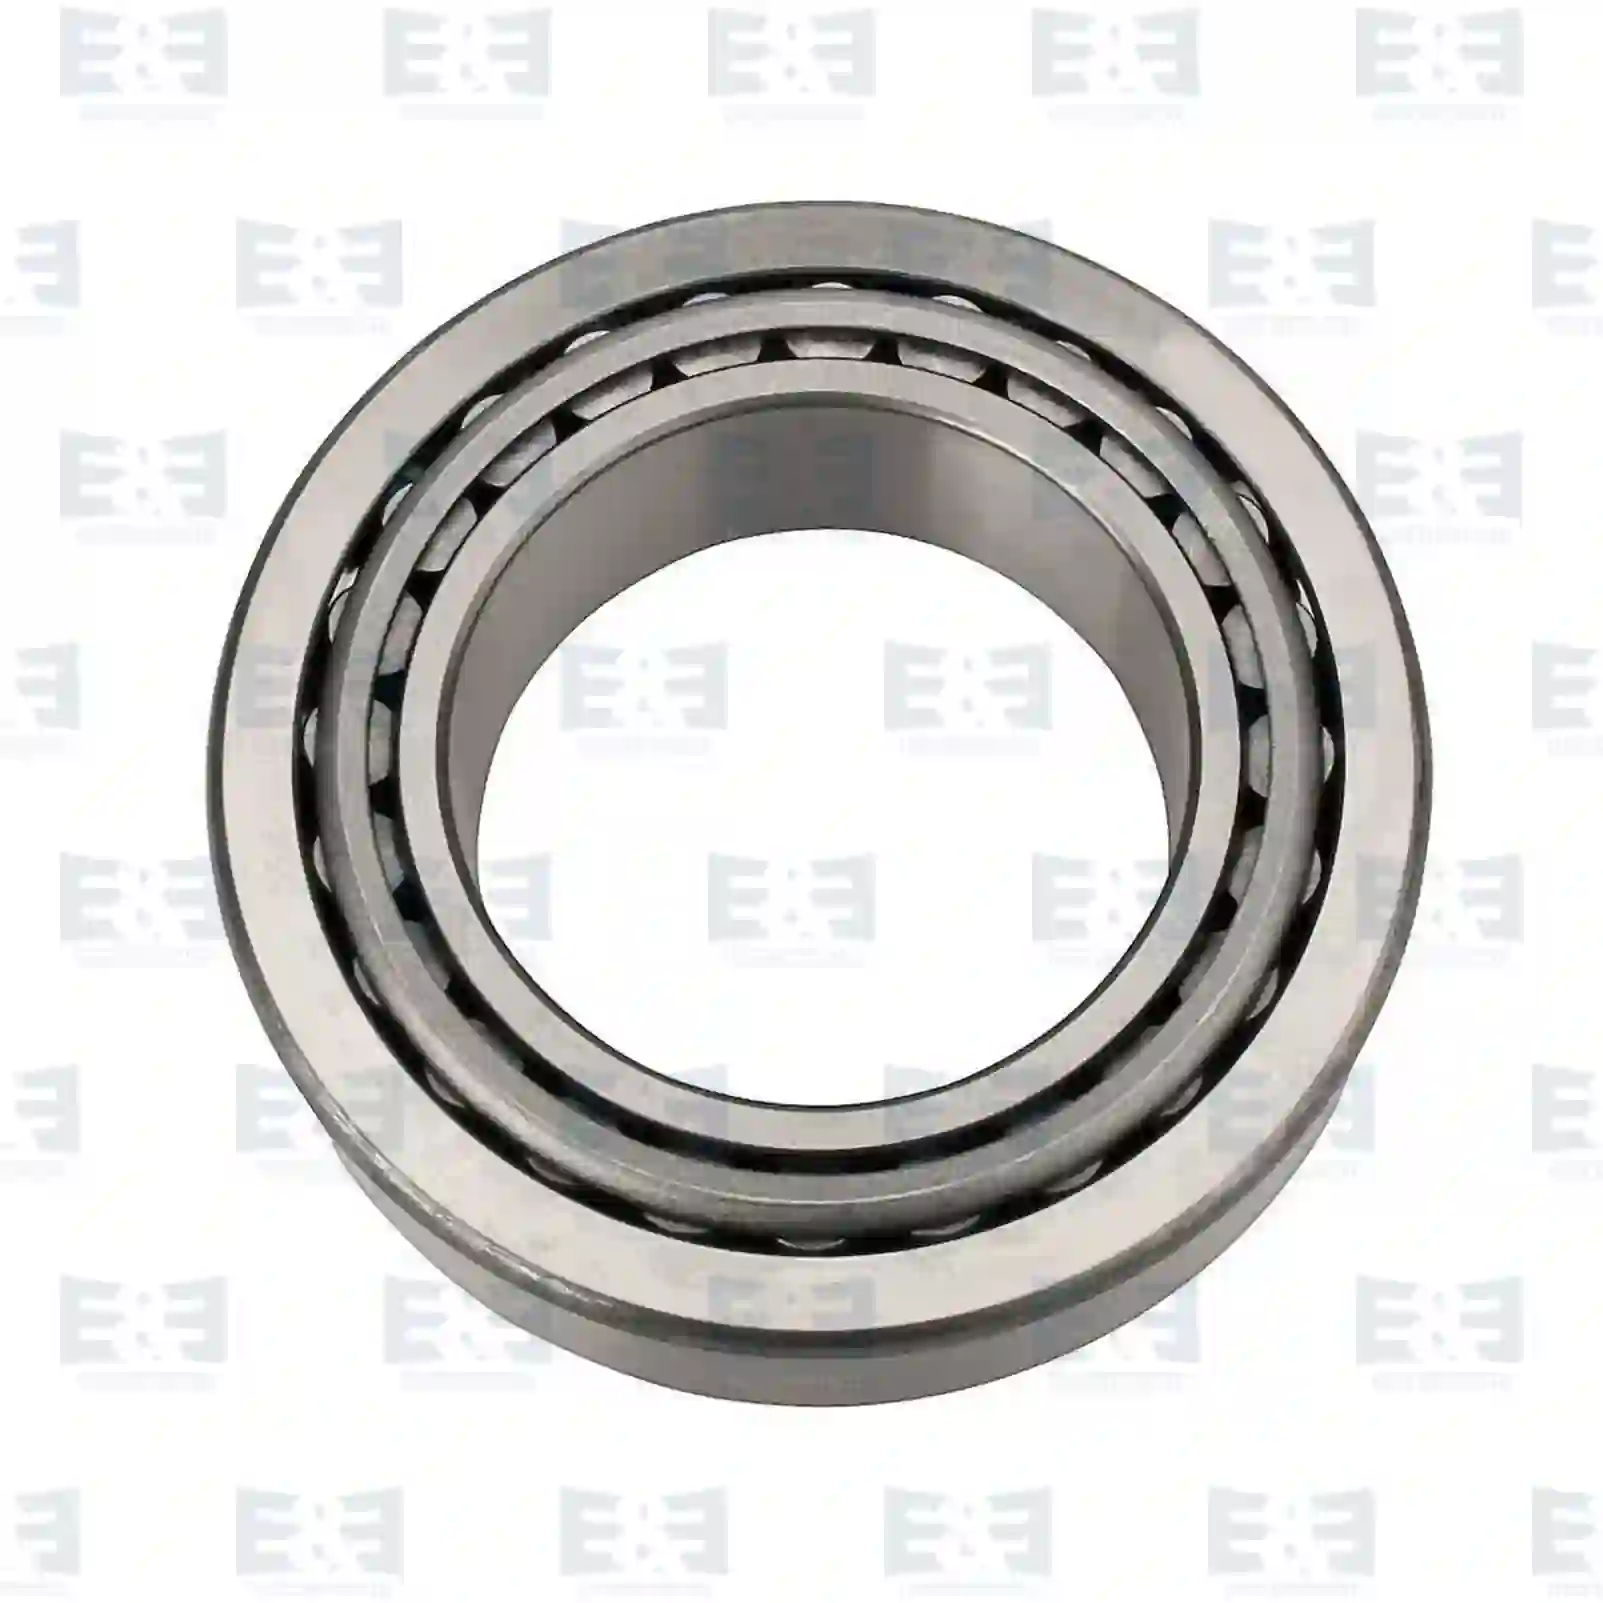 Rear Axle, Complete Tapered roller bearing, EE No 2E2270757 ,  oem no:0221664, 221664, 5000788406, 06324990040, 06324990131, 06324990189, 81934200270, 0009814218, 0039813005, 0039813205, 0089810305, 43210-D930A, 0023433115, 5000788406, 184678, ZG03011-0008 E&E Truck Spare Parts | Truck Spare Parts, Auotomotive Spare Parts